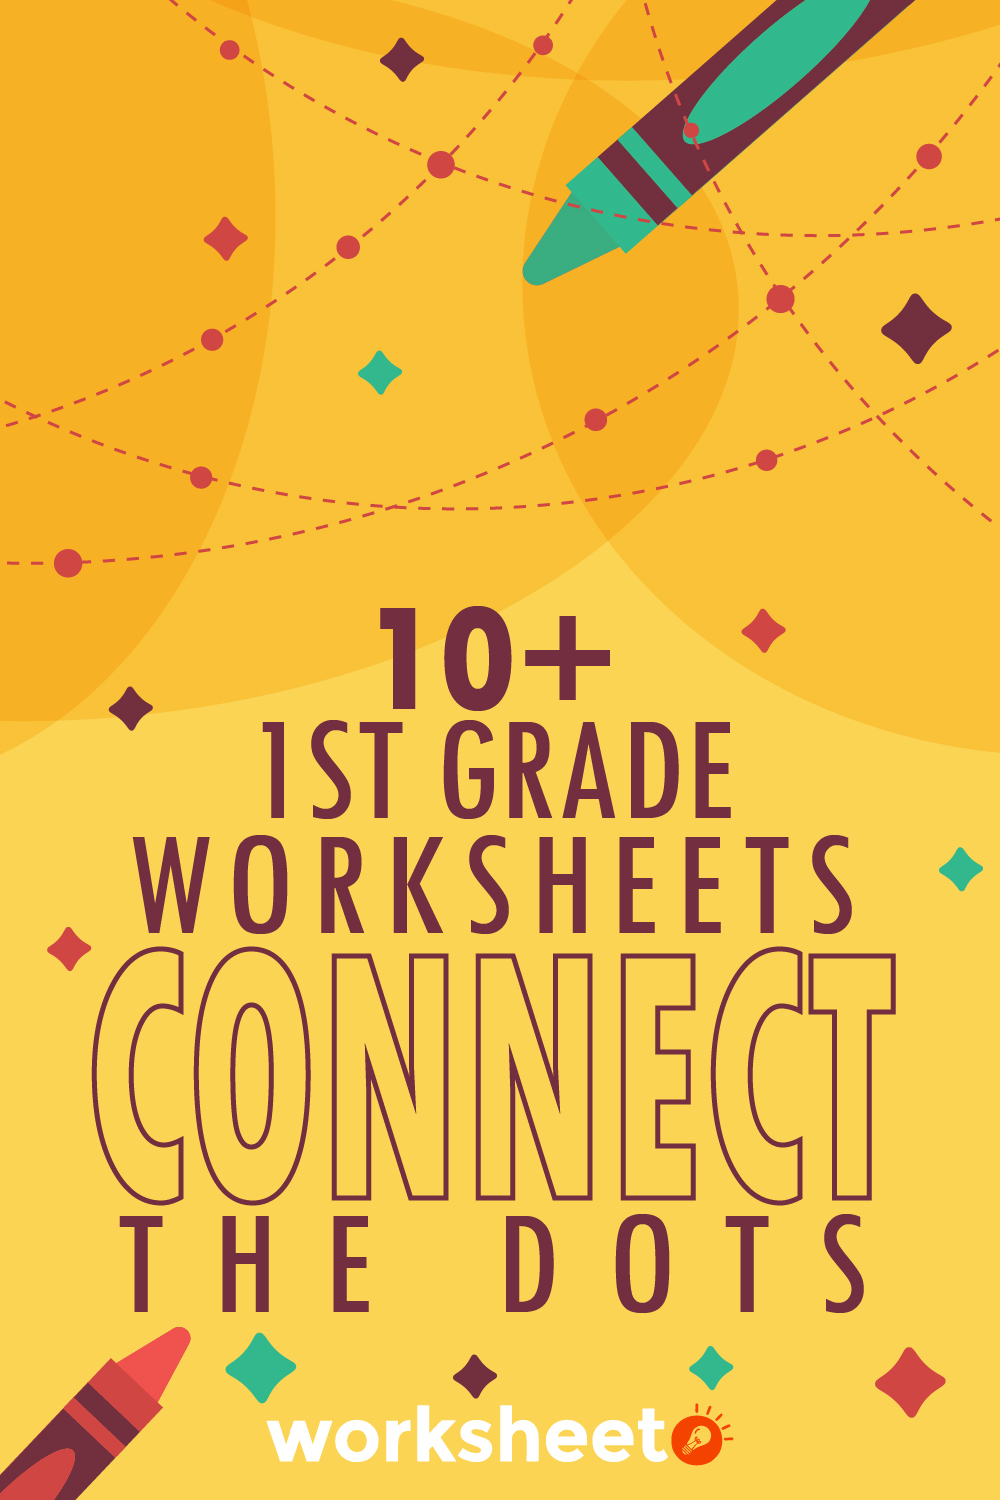 1st Grade Worksheets Connect the Dots